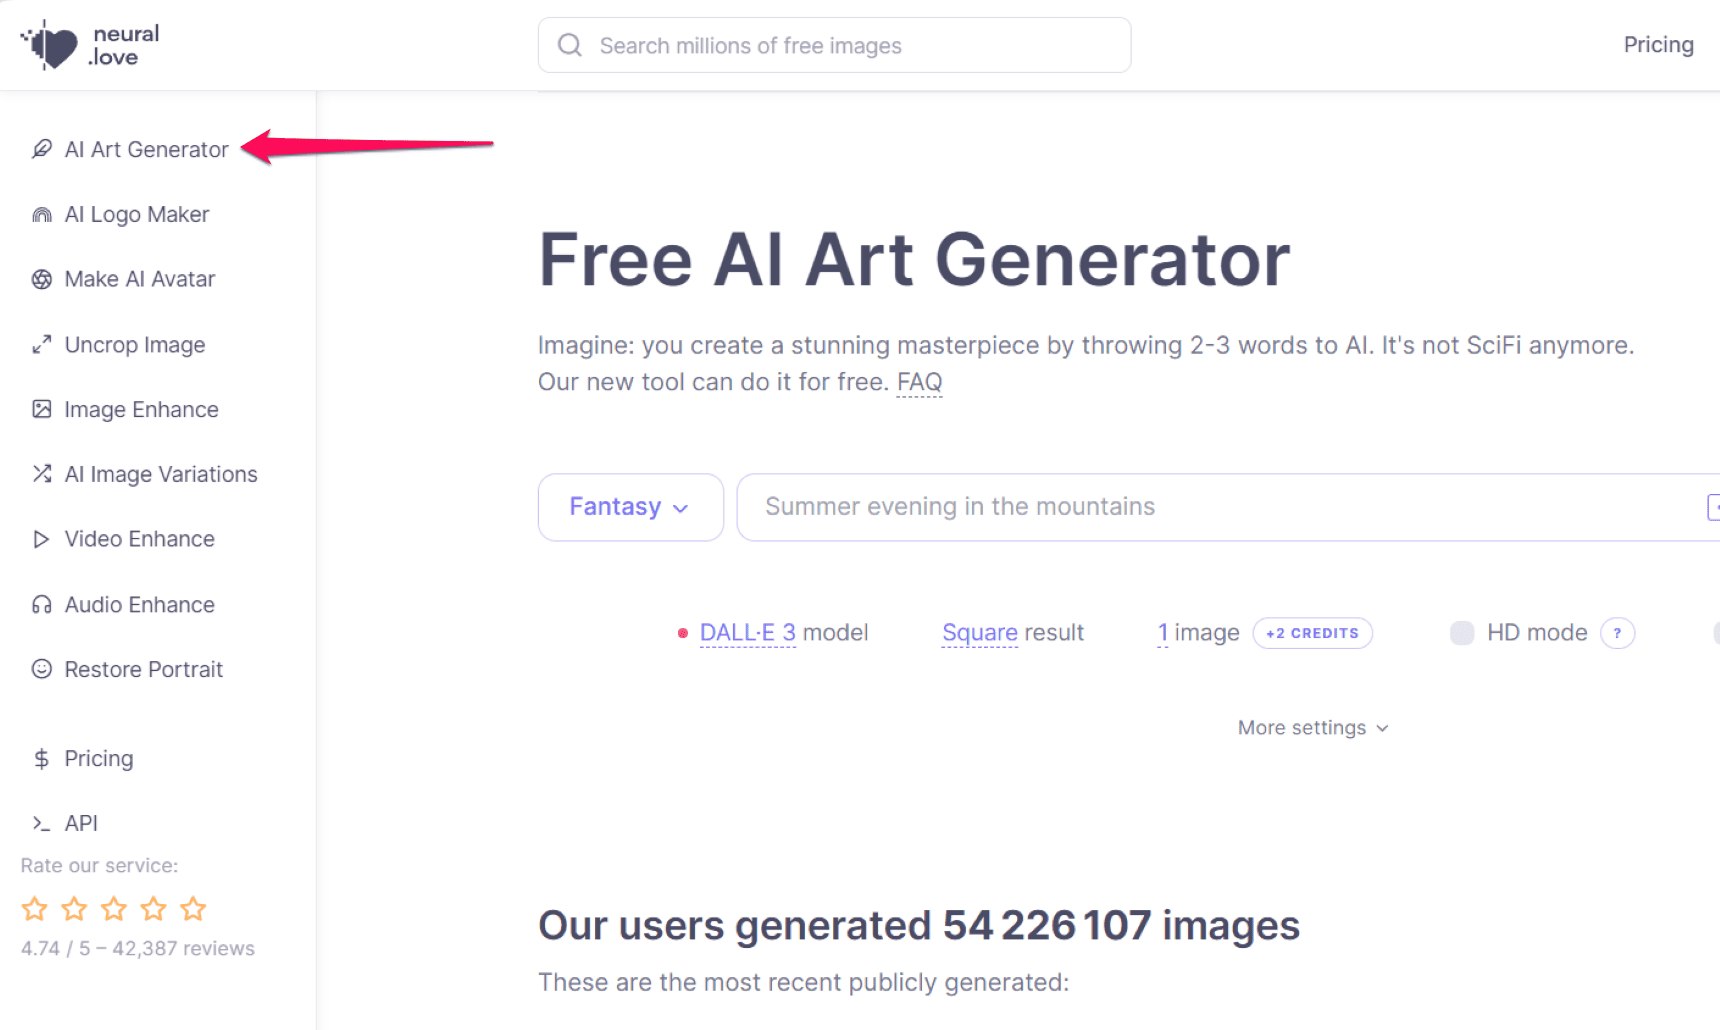 Locating AI Art Generator on the Neural Love homepage